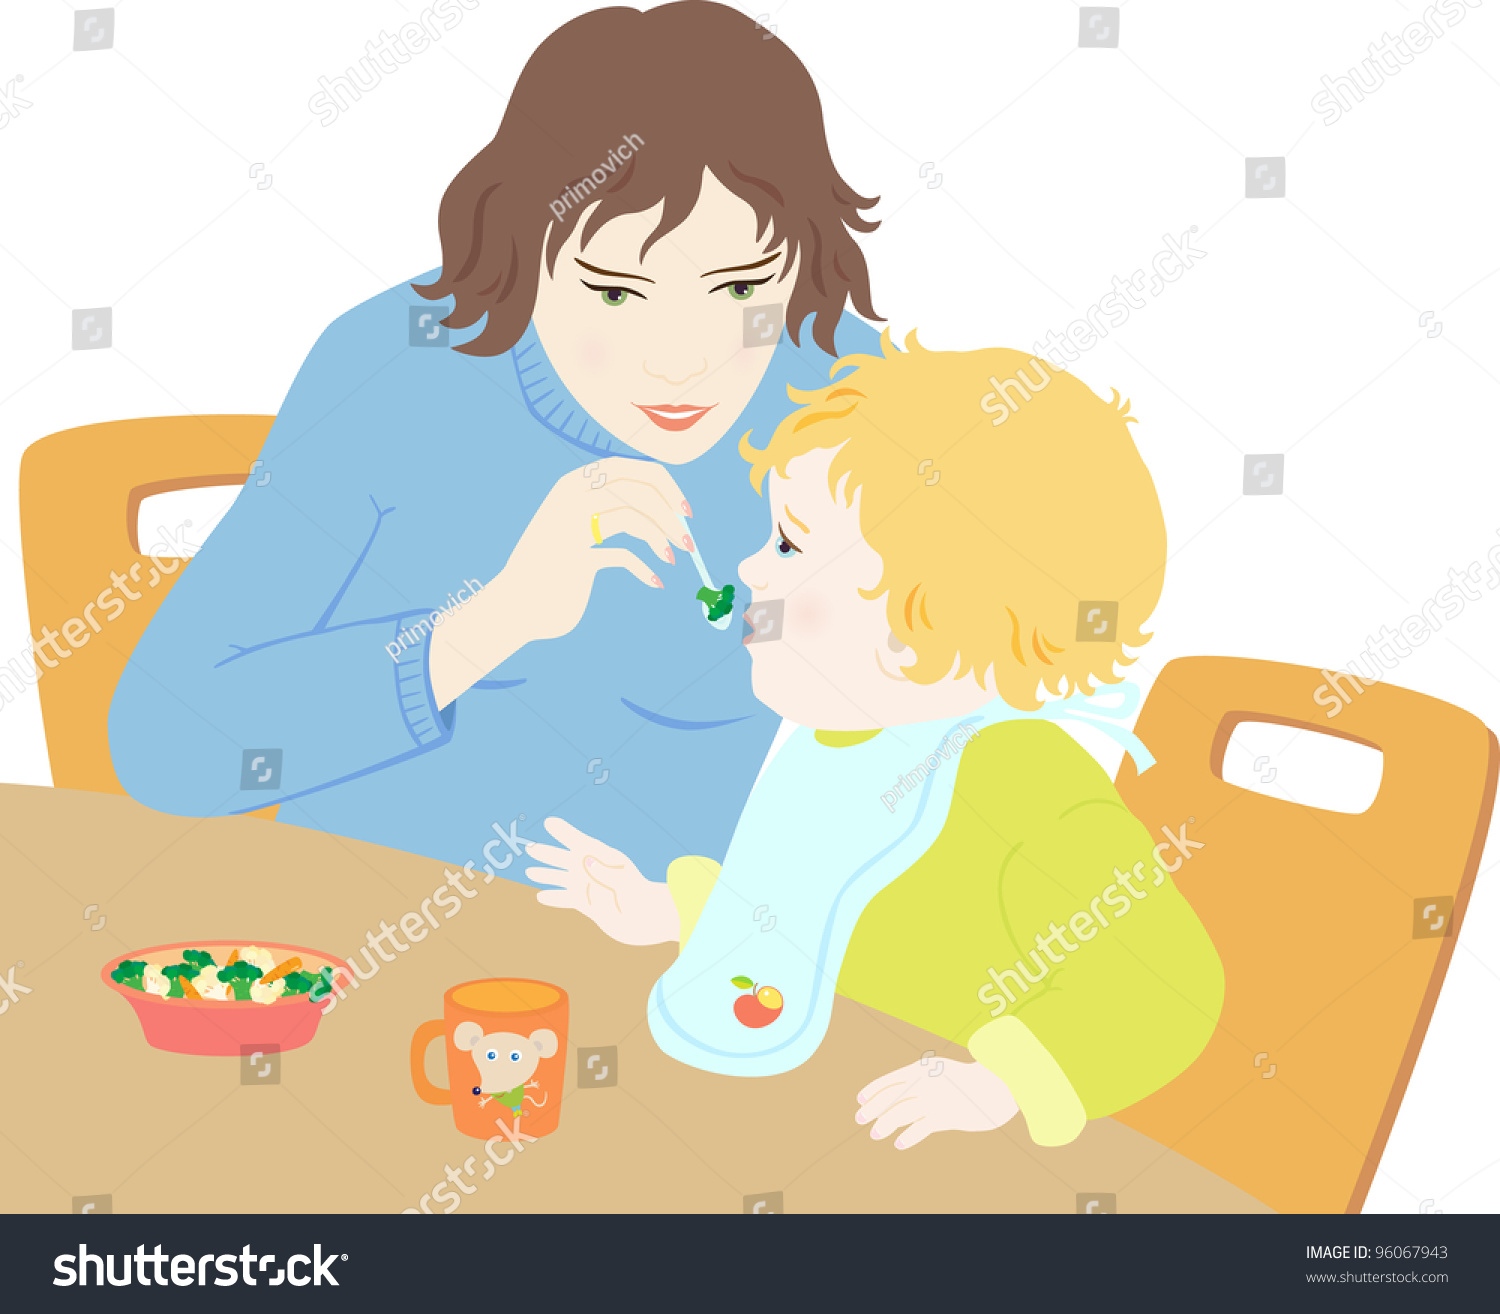 clipart of mother feeding baby - photo #17